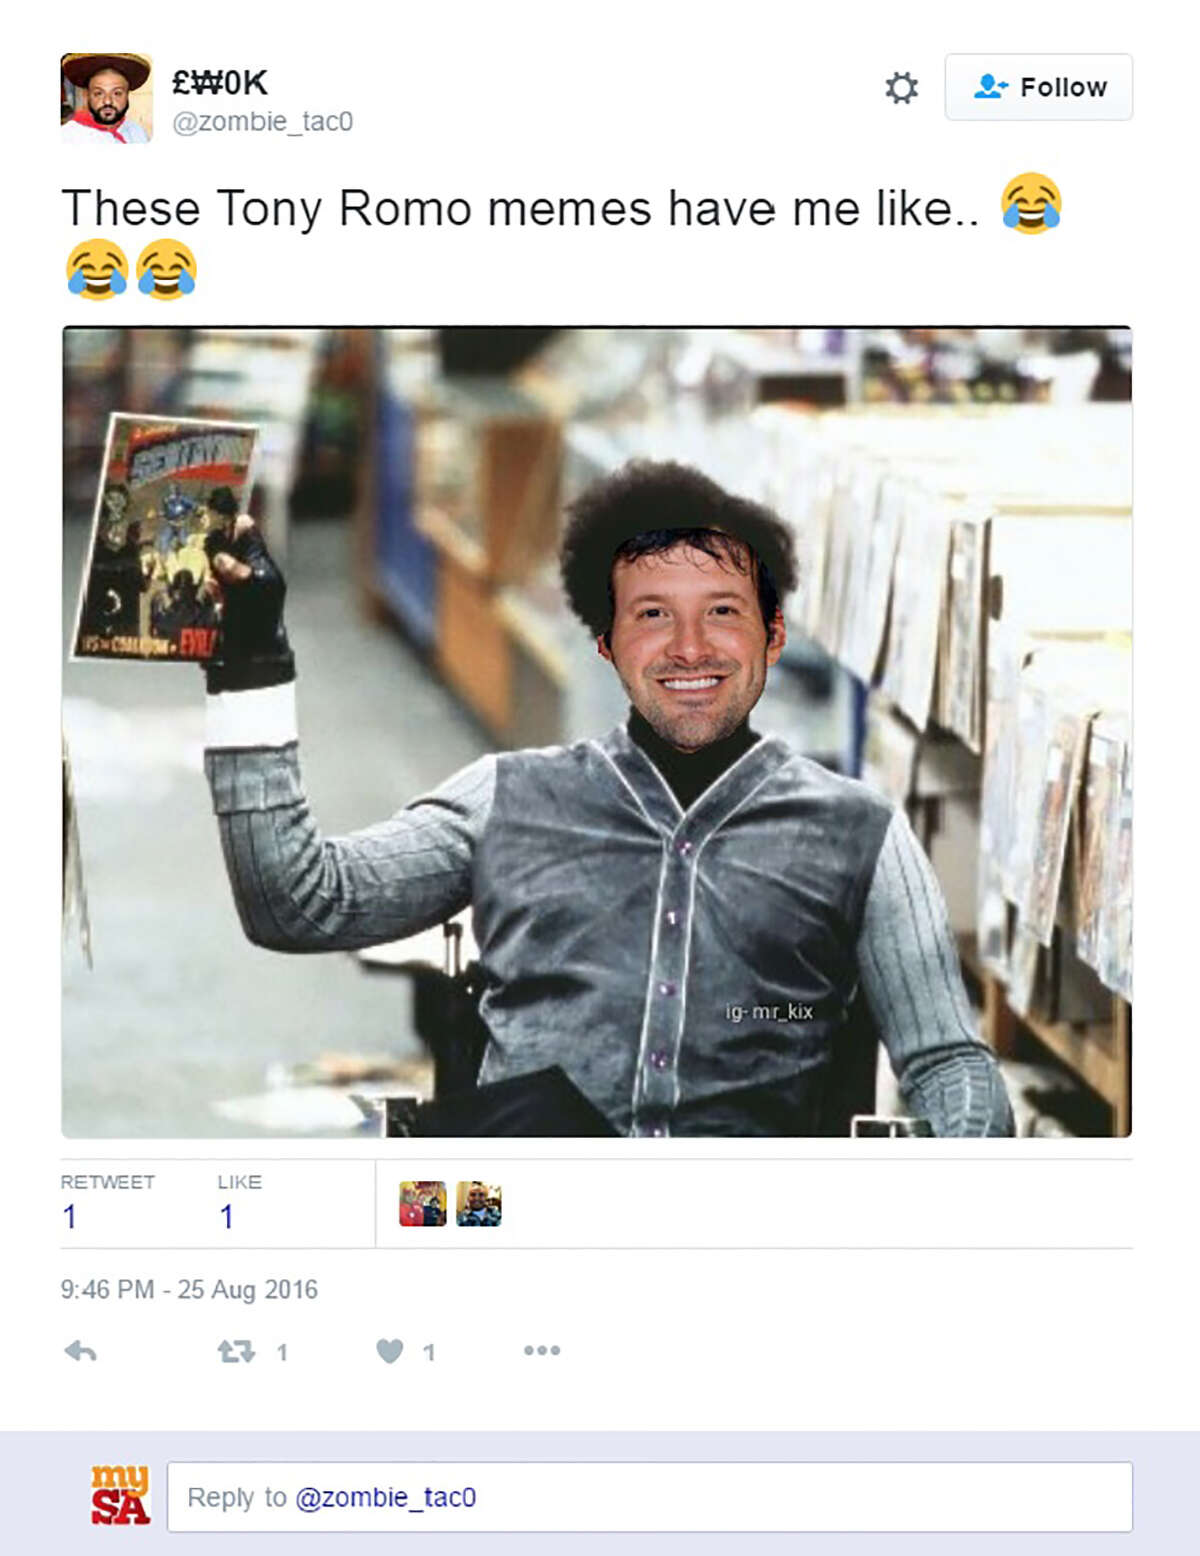 Users on social media sites broke out their best memes to poke fun at Tony Romo’s latest injury.